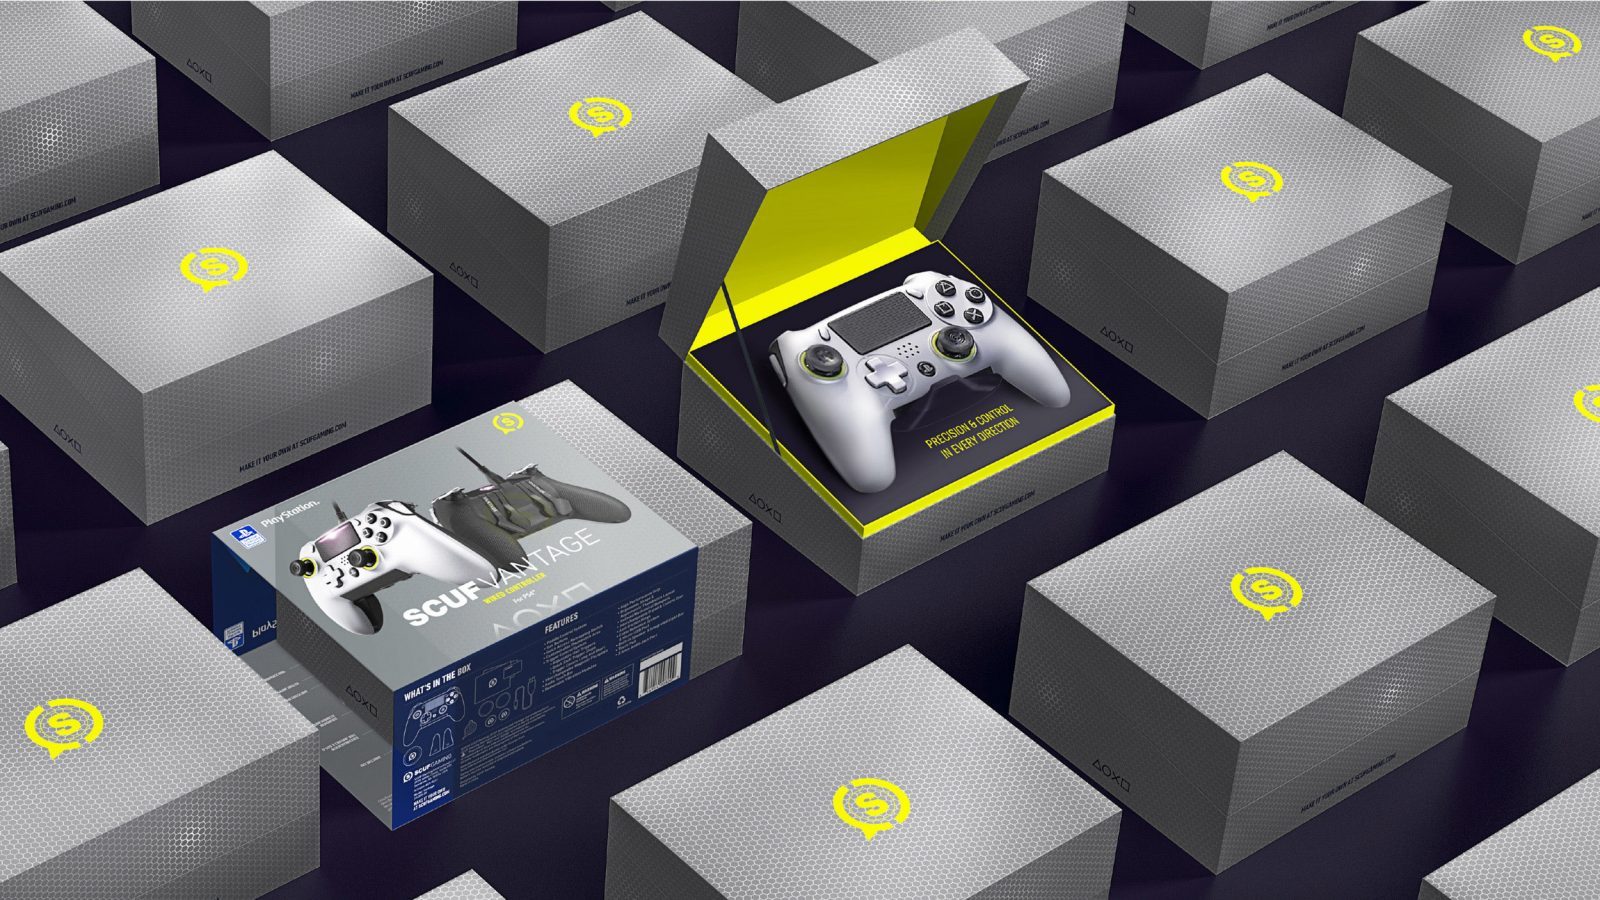 Rebrand and Packaging for Next Level Gaming Company SCUF